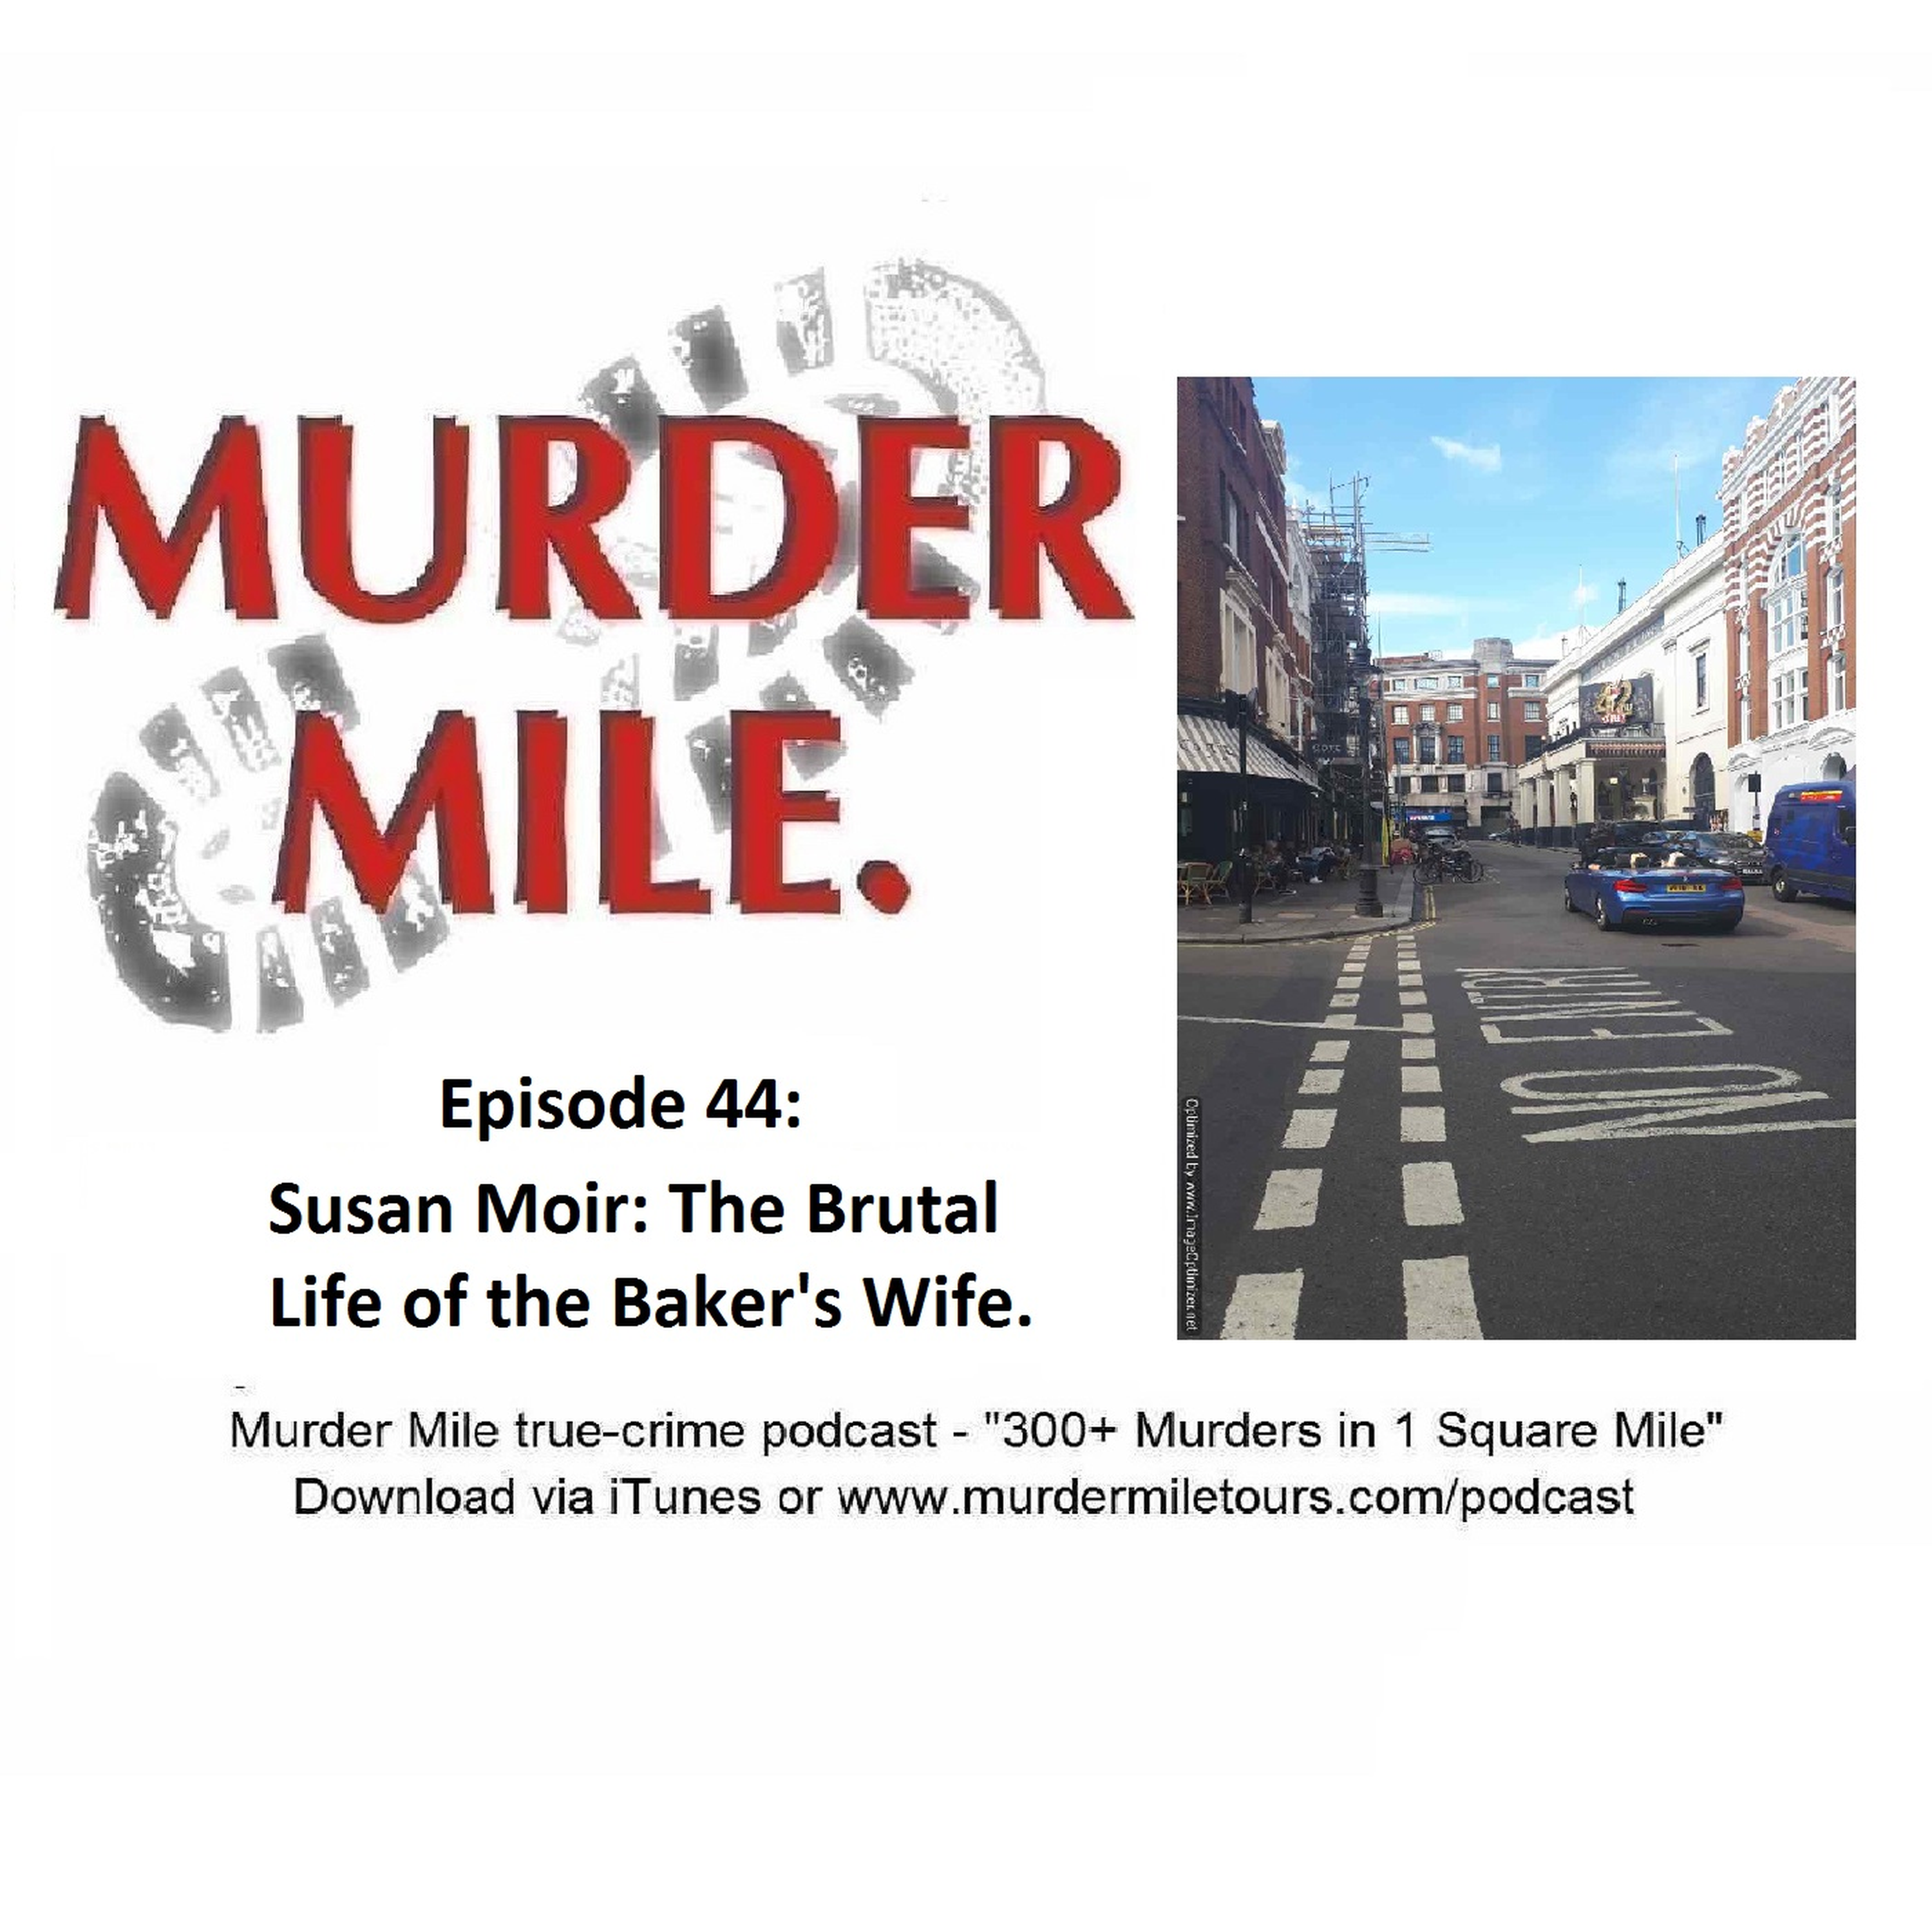 #44 - Susan Moir: The Brutal Life of the Baker’s Wife